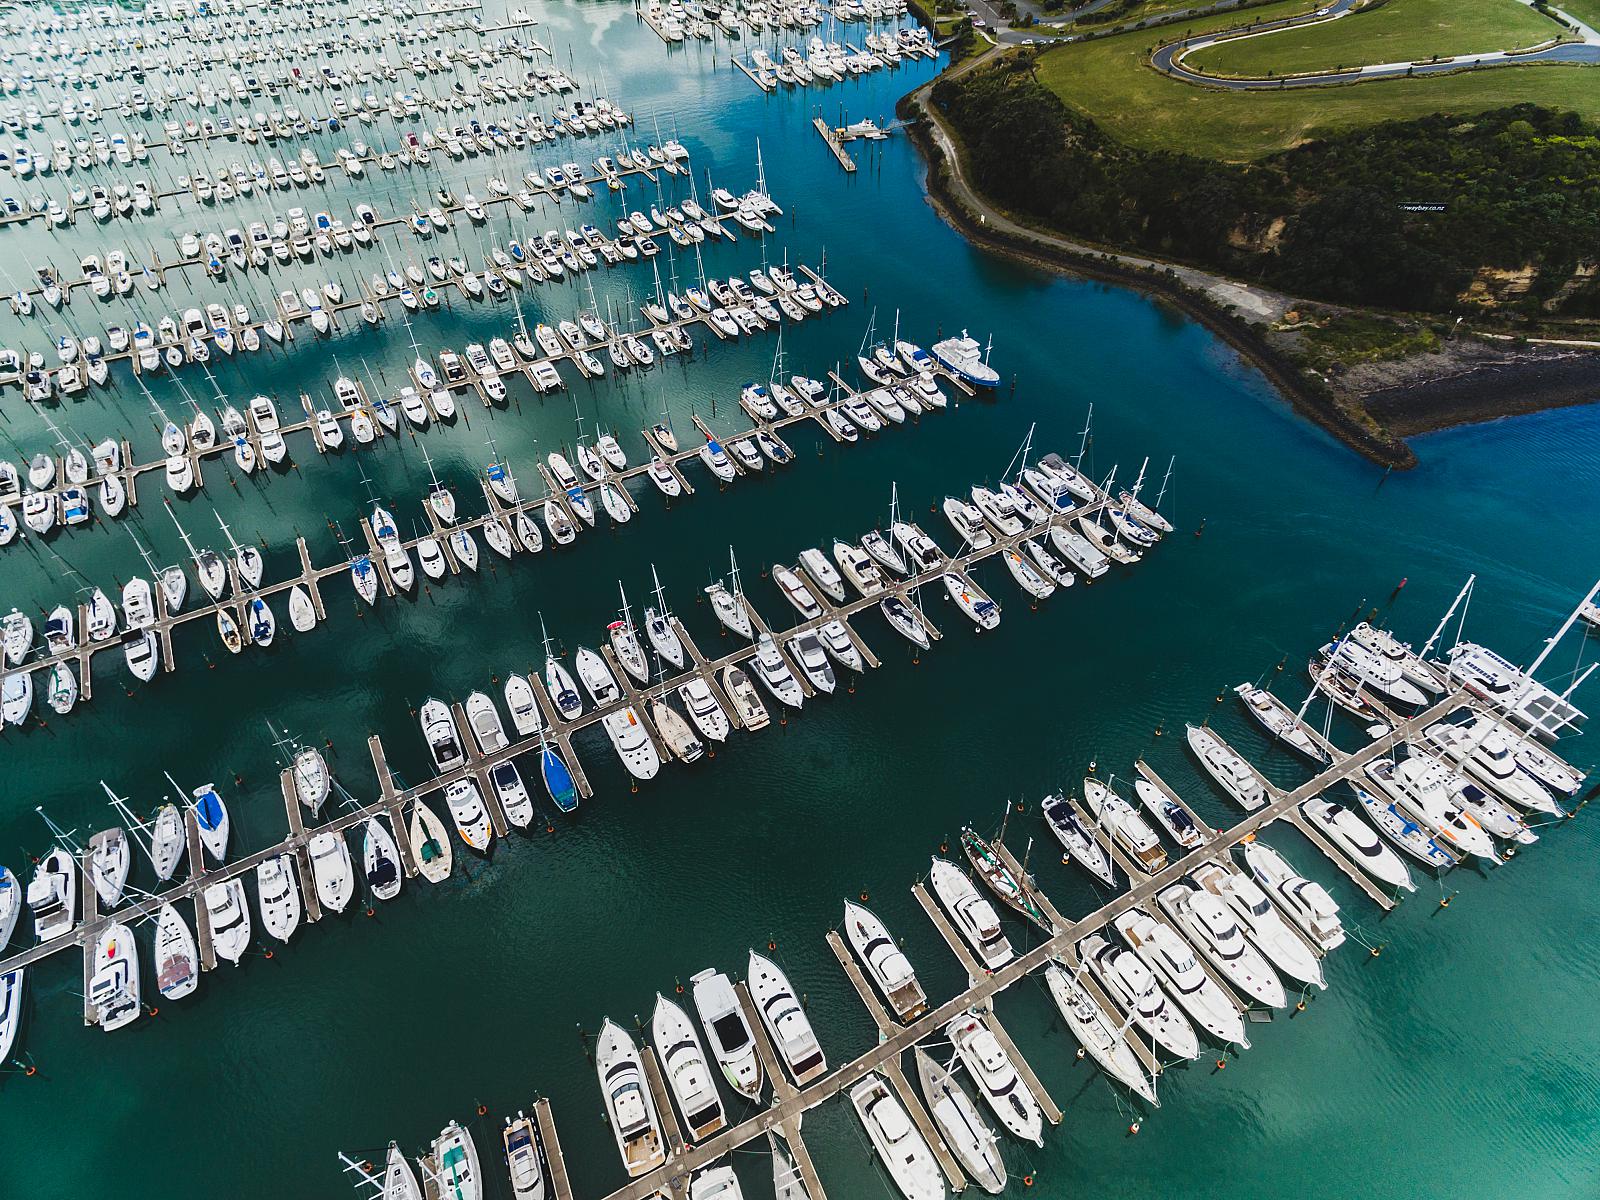 Overhead view of boats in harbor